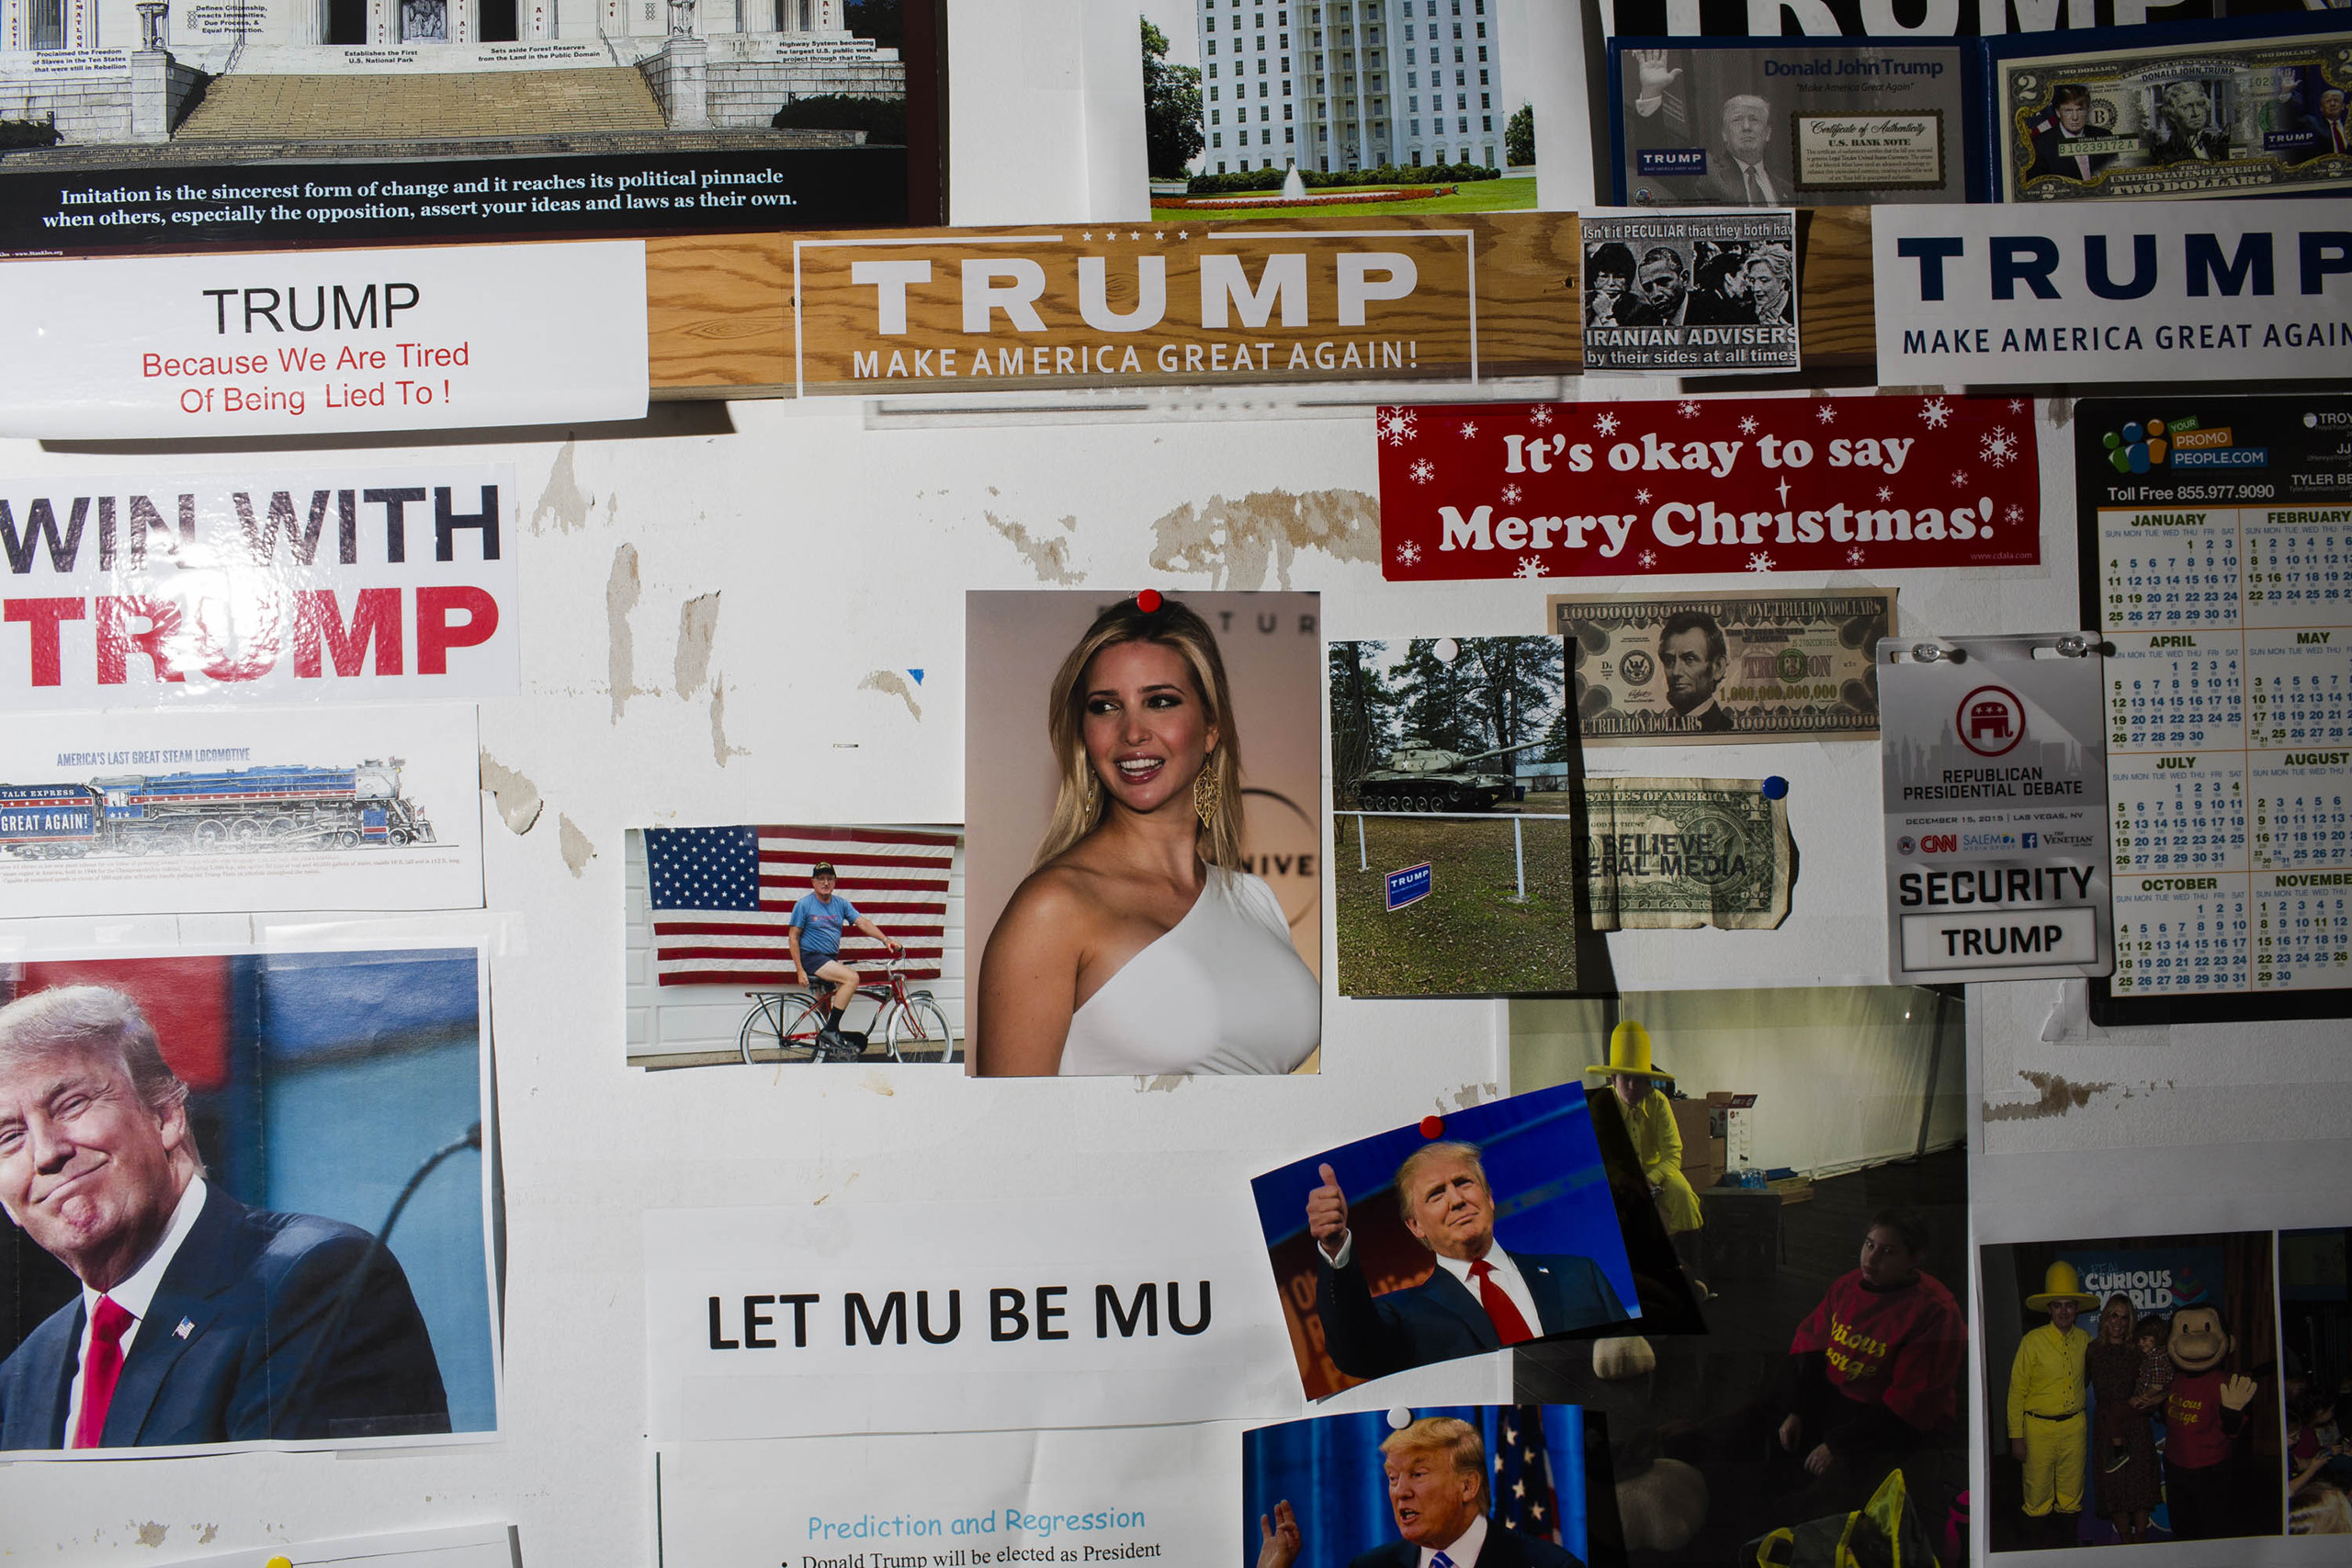 Wall decorations inside the campaign headquarters of Donald Trump on May 24, 2016, in Trump Tower, New York City.